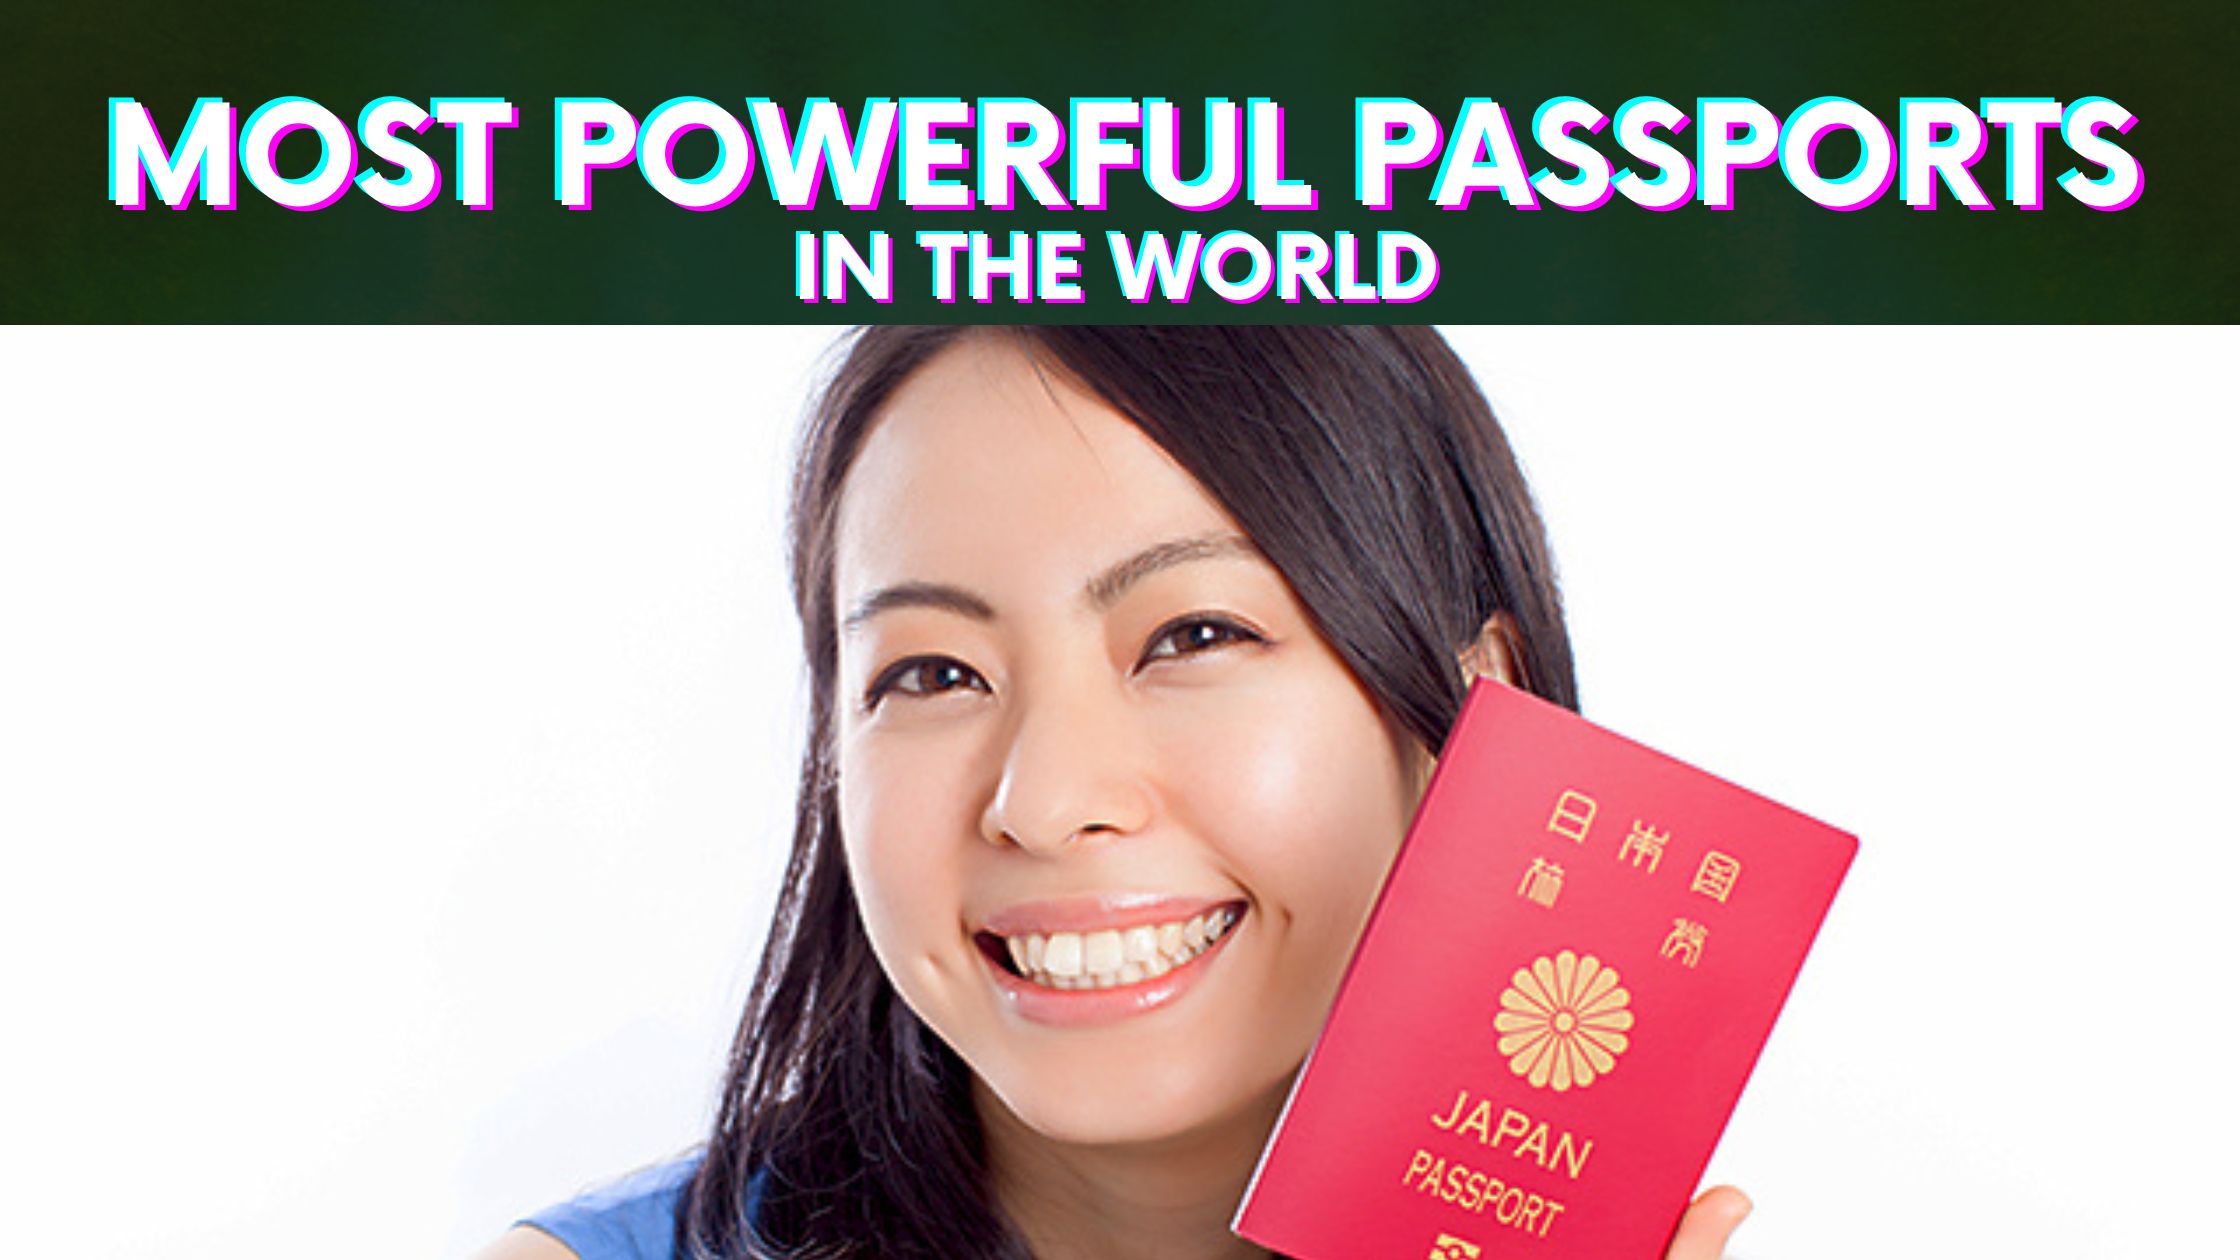 Top 10 Most Powerful Passports In The World